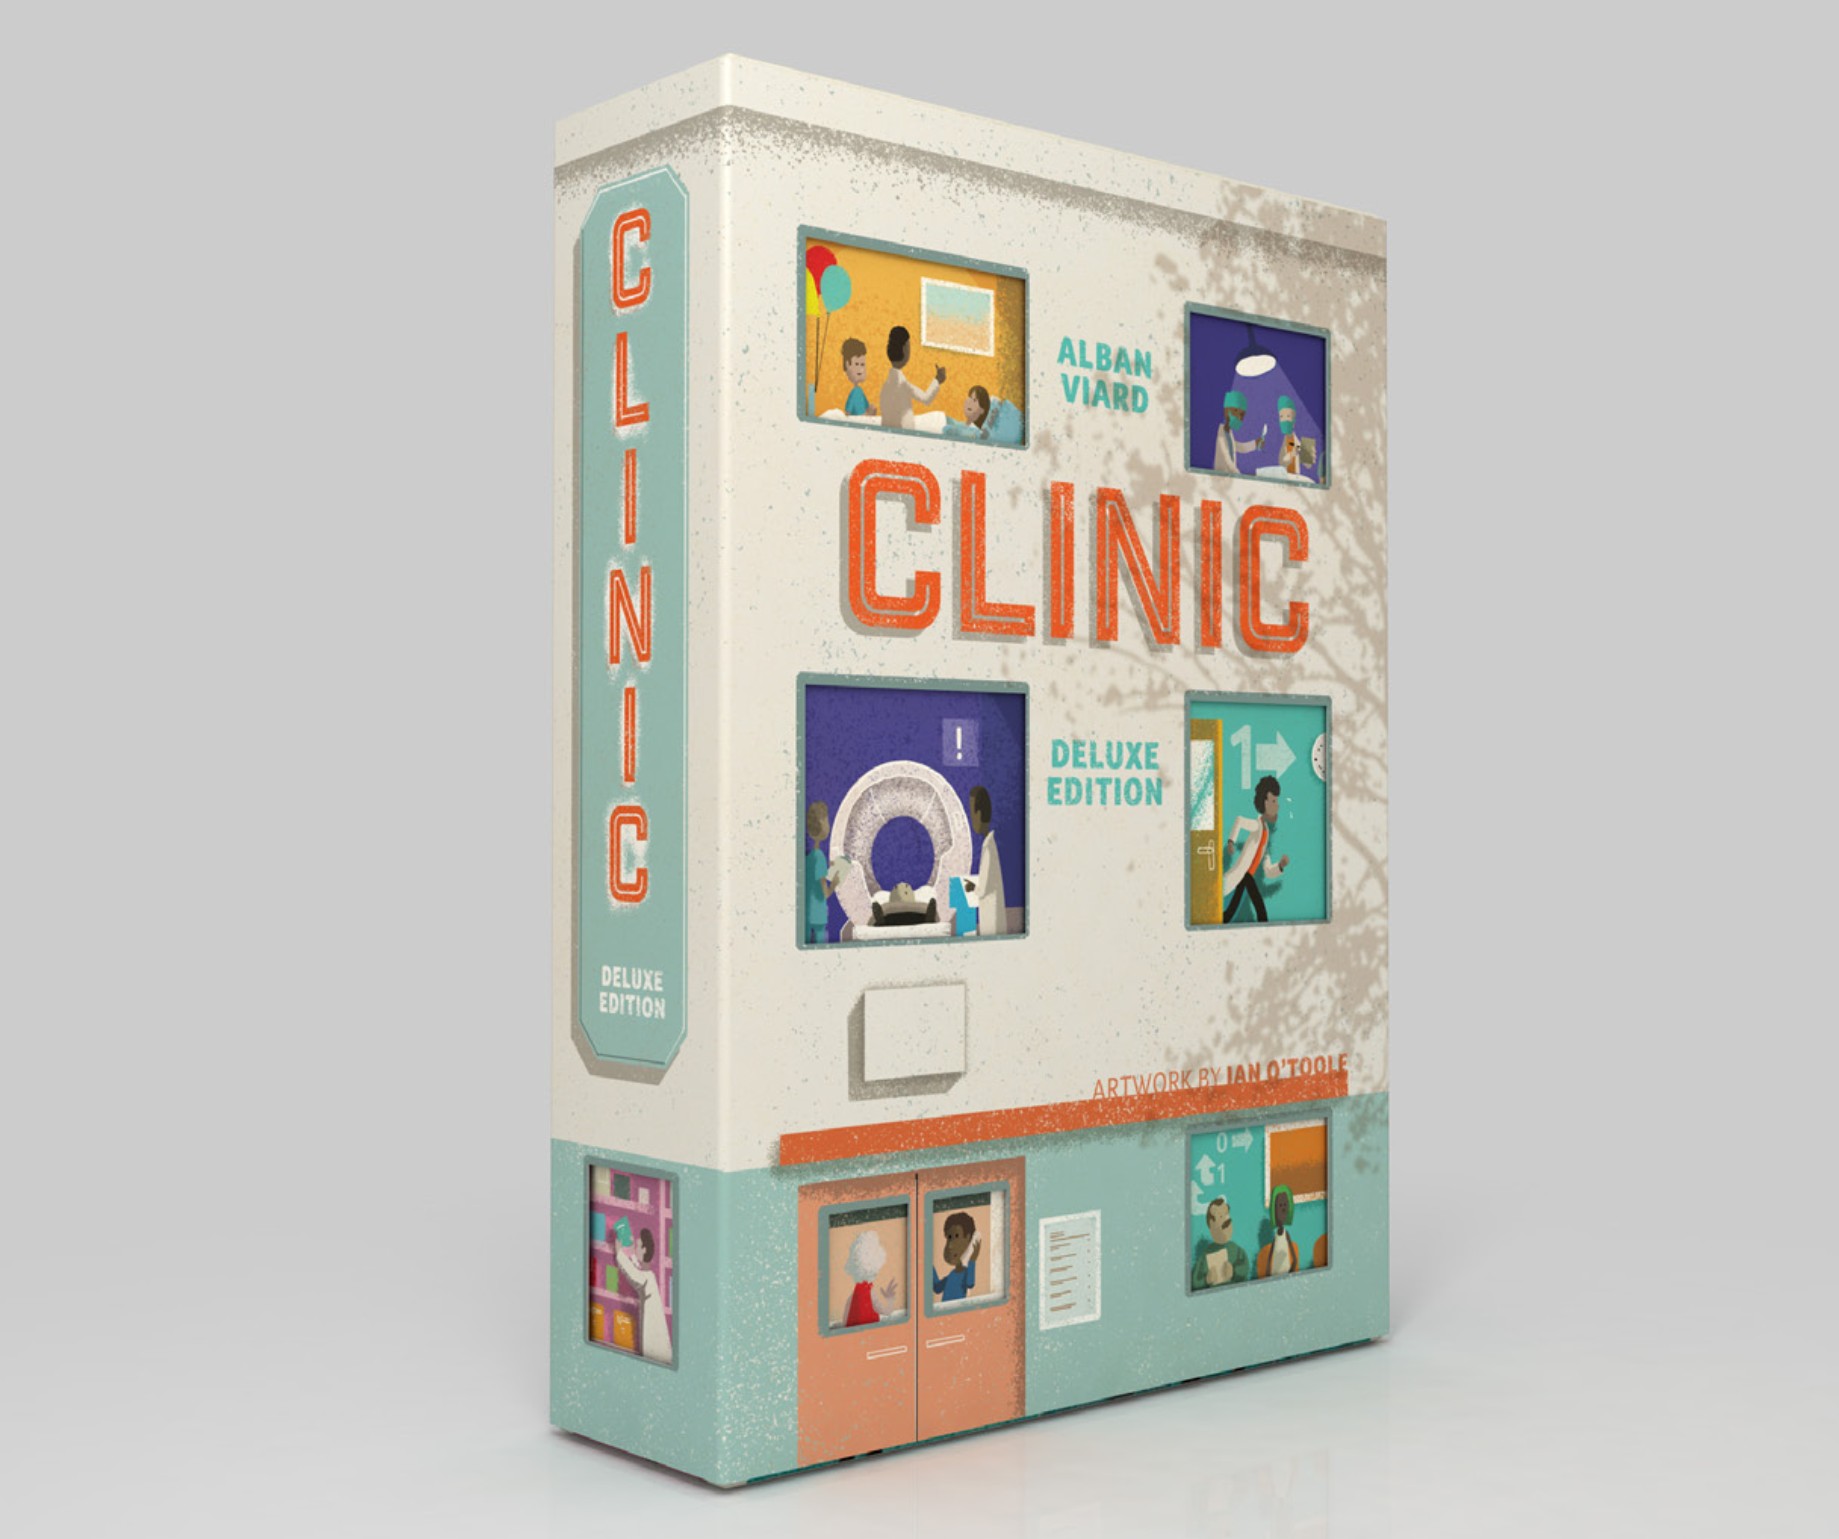 Mercury Games Clinic Deluxe Edition